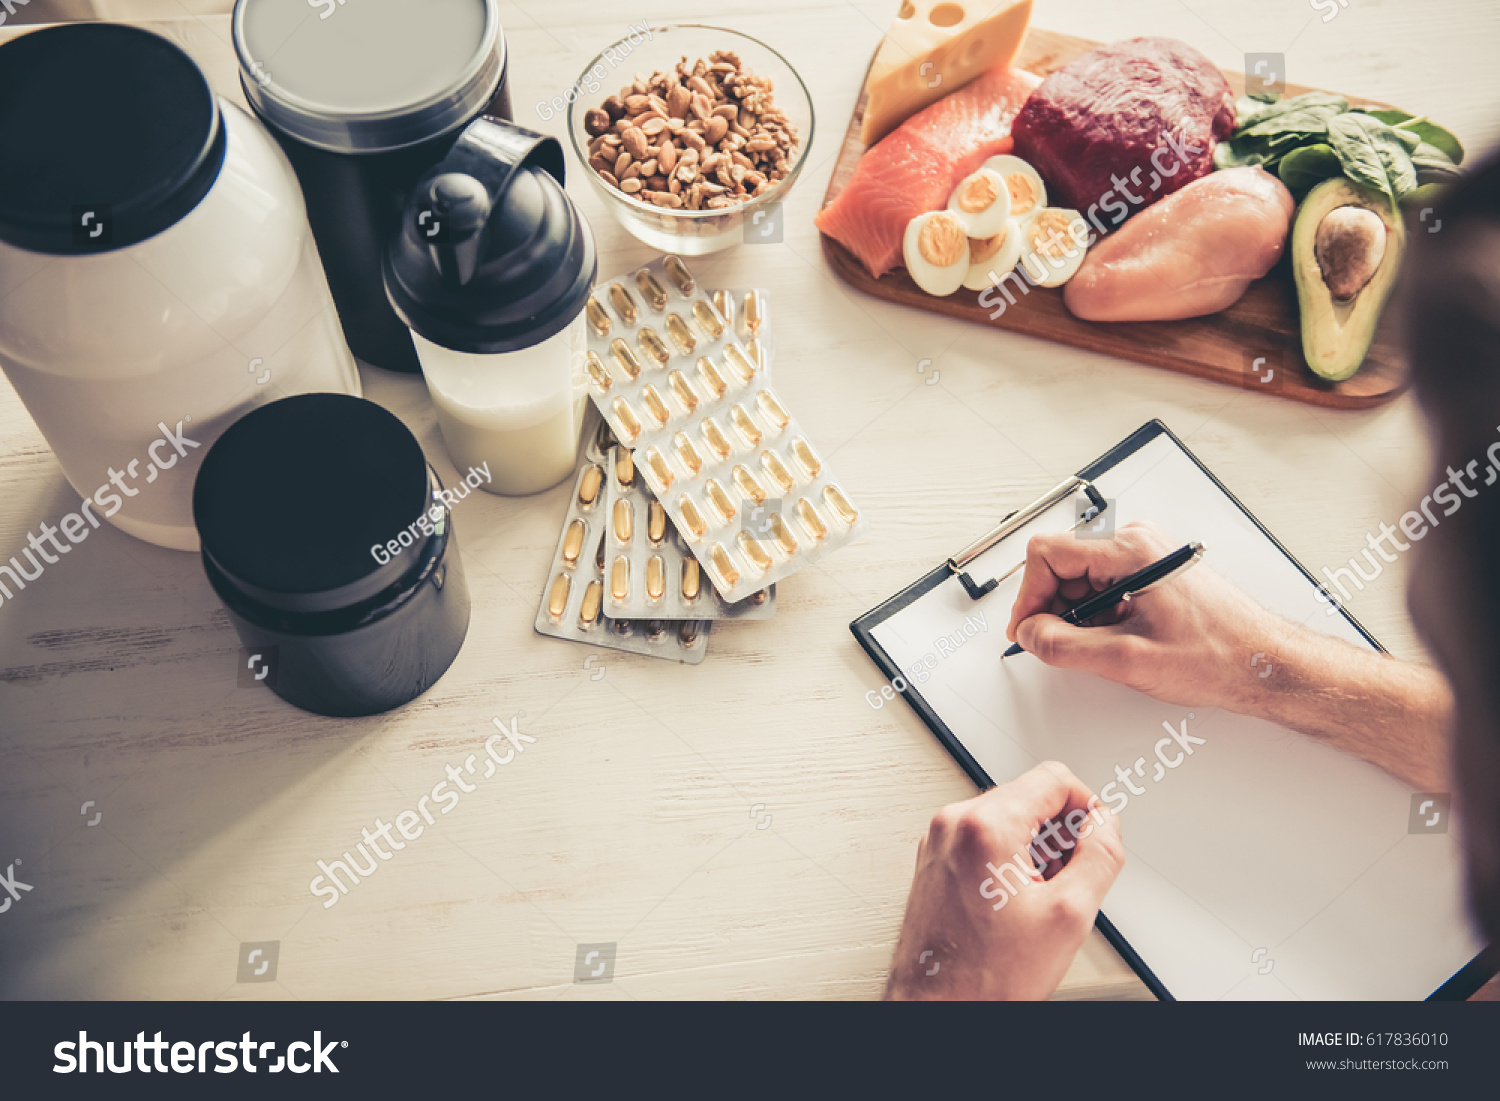 Cropped image of handsome young sportsman making notes while preparing sport nutrition in kitchen at home #617836010